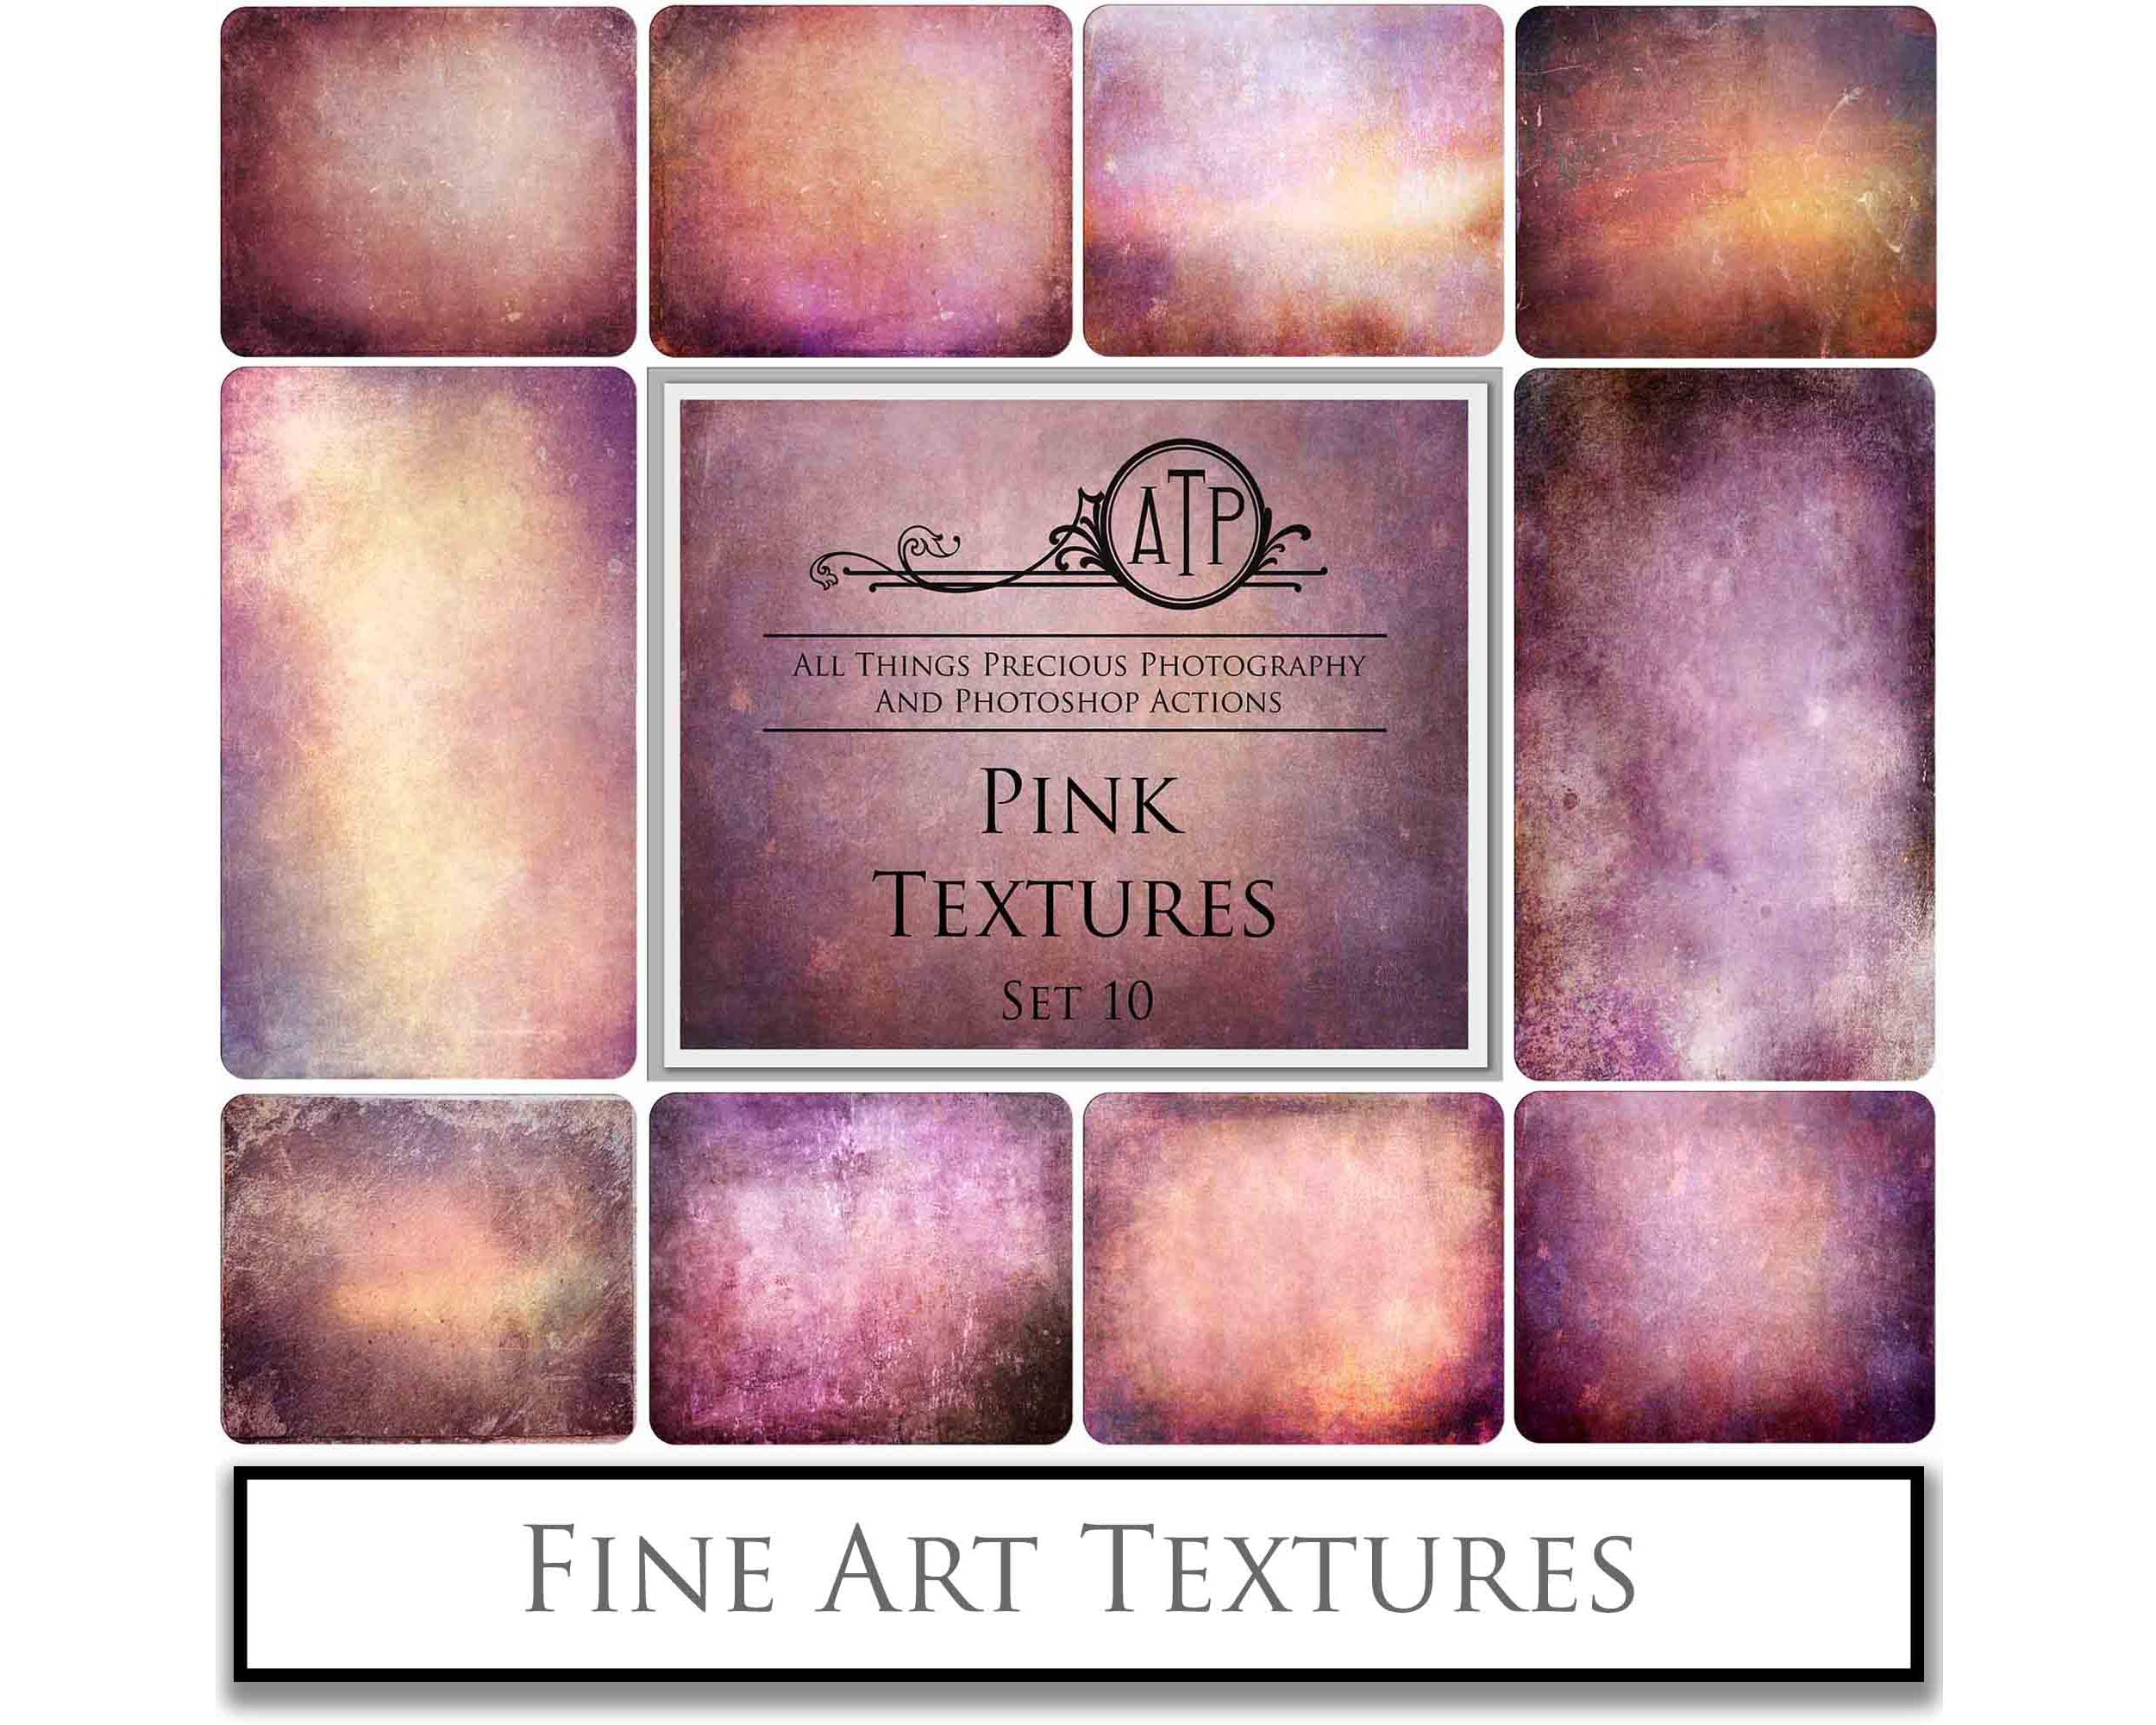 Pretty Pink textures. Fine art texture for photographers, digital editing. Photo Overlays. Antique, Vintage, Grunge, Light, Aged Bundle. Textured printable Canvas, Colour, black and white, Bundle. High resolution, 300dpi Graphic Assets for photography, digital scrapbooking and design. By ATP Textures